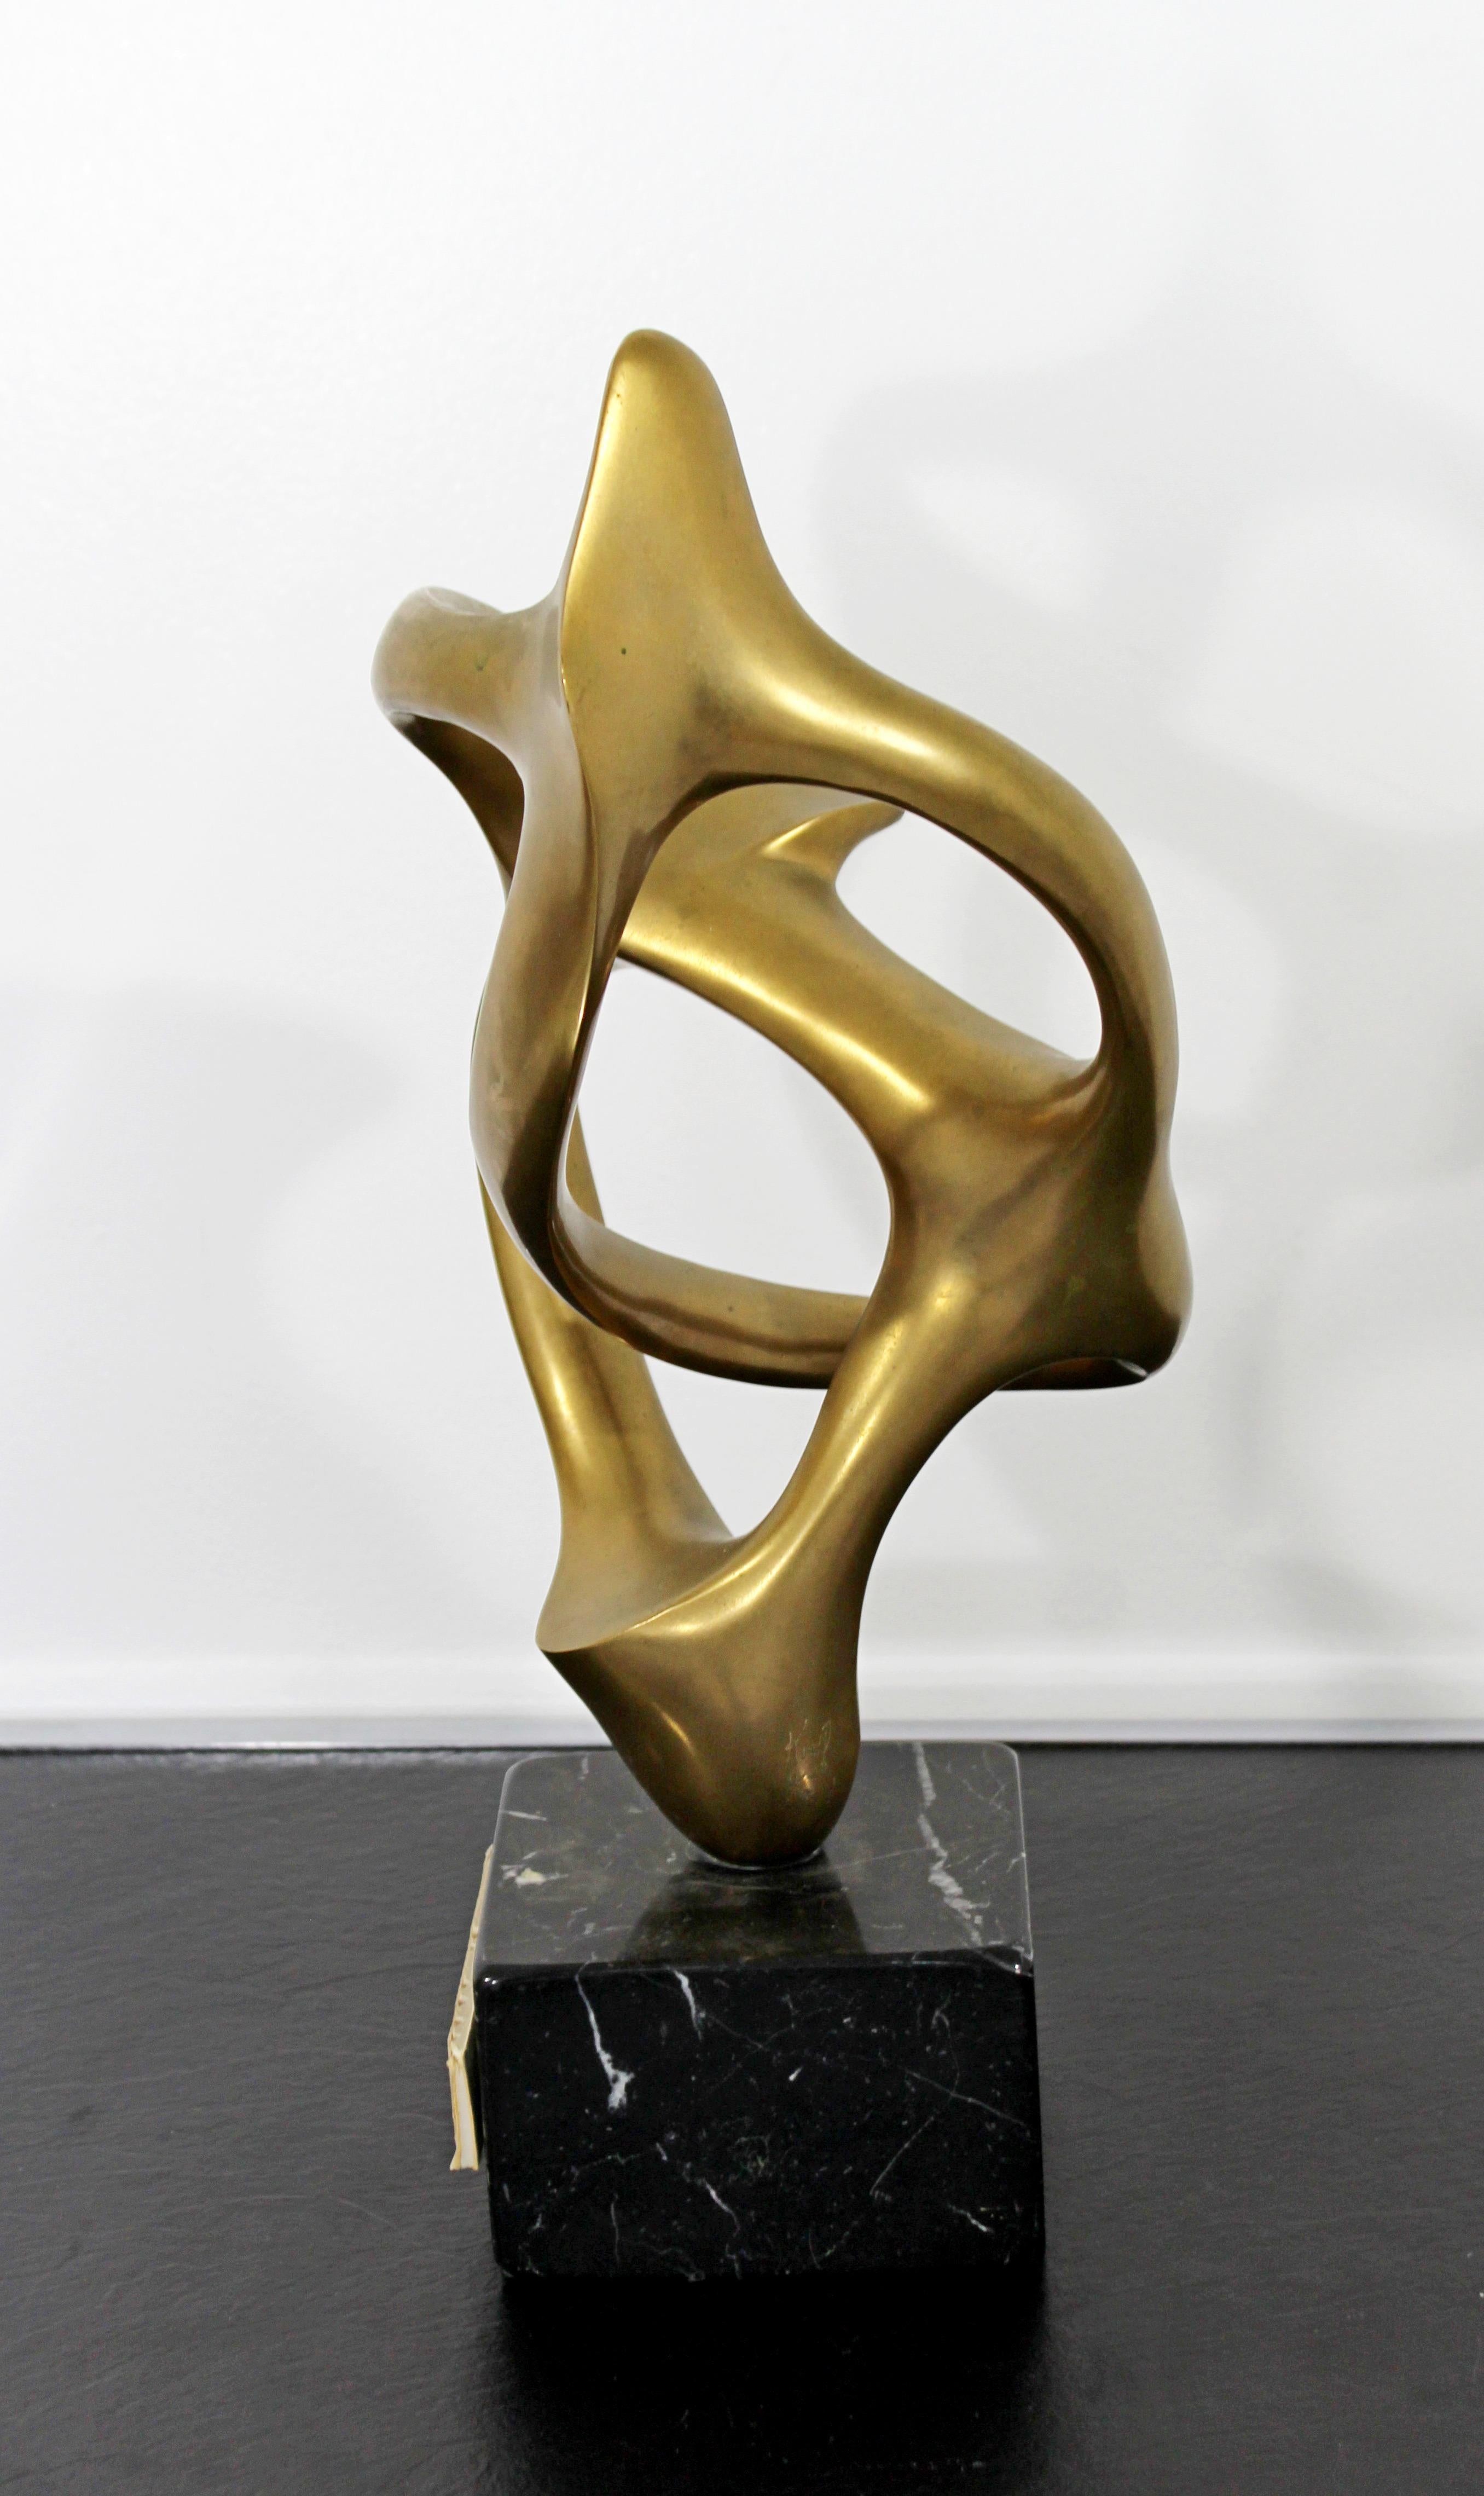 Late 20th Century Contemporary Modern Bronze Marble Table Sculpture Signed by Kieff Grediaga AP